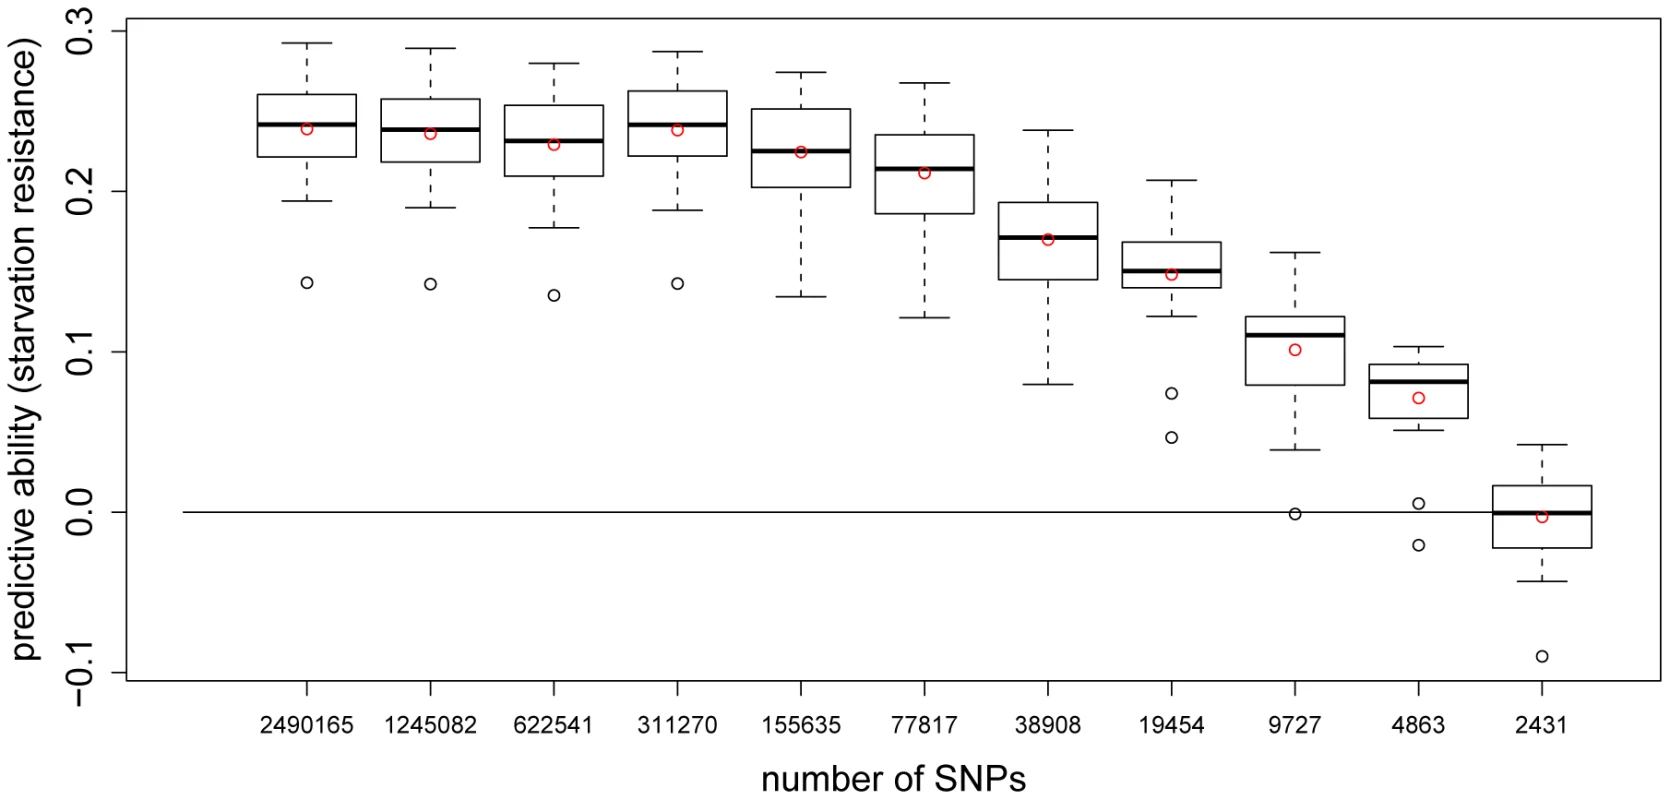 Predictive ability of 5-fold CV with GBLUP for starvation resistance using different numbers of SNPs.